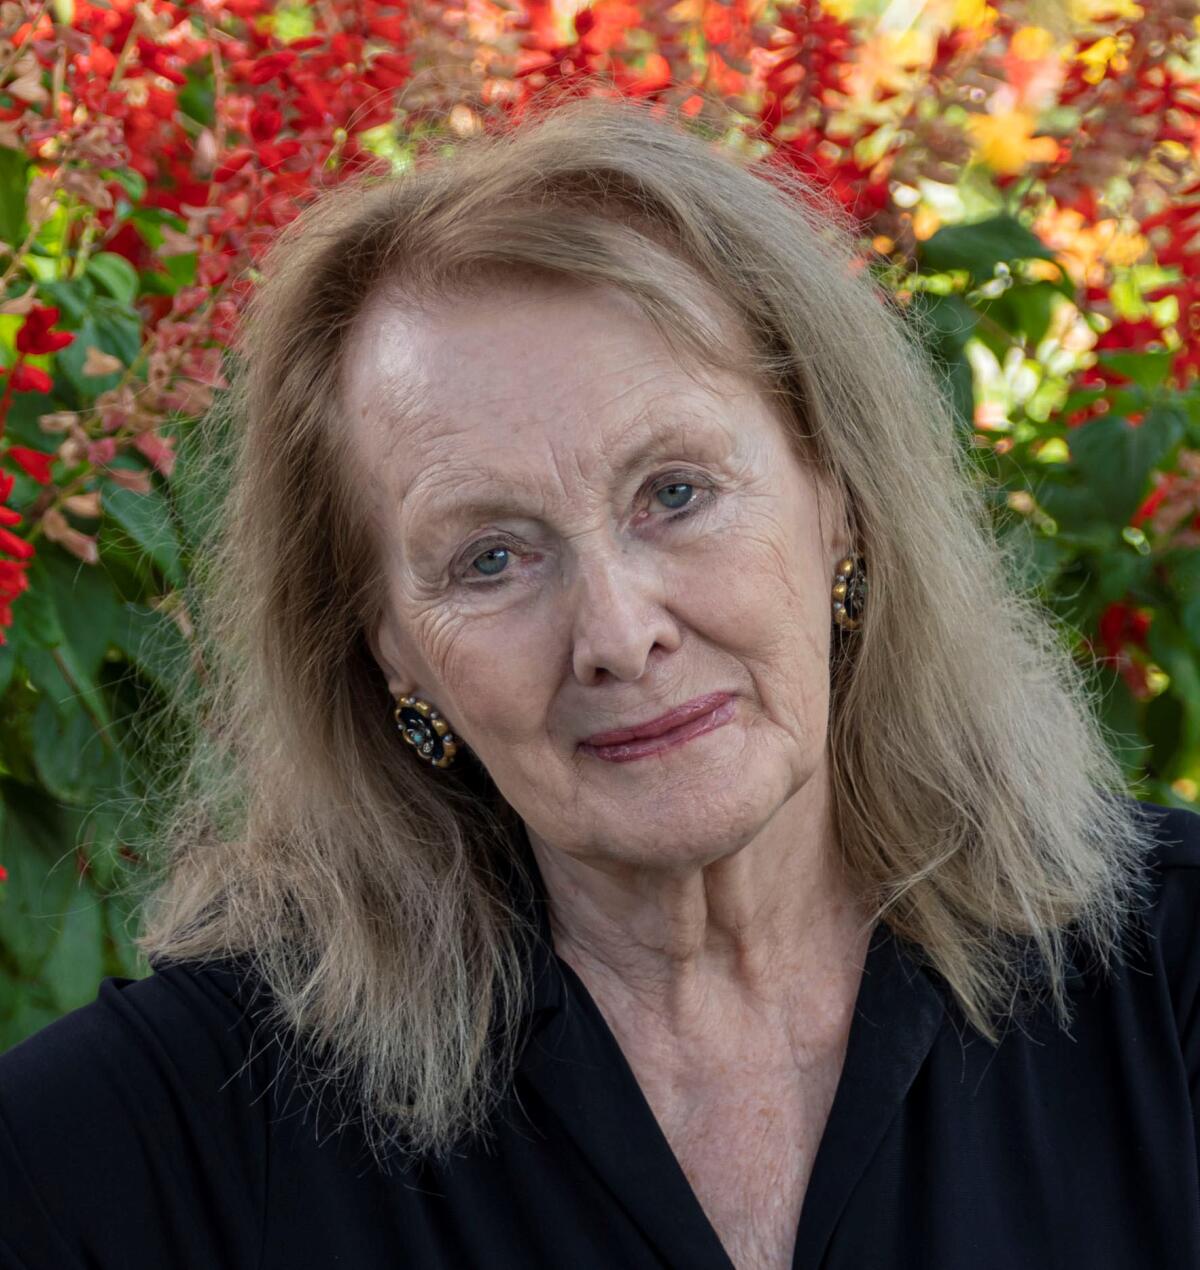 An older woman with light blond hair and an open black shirt with red flowers in the background.